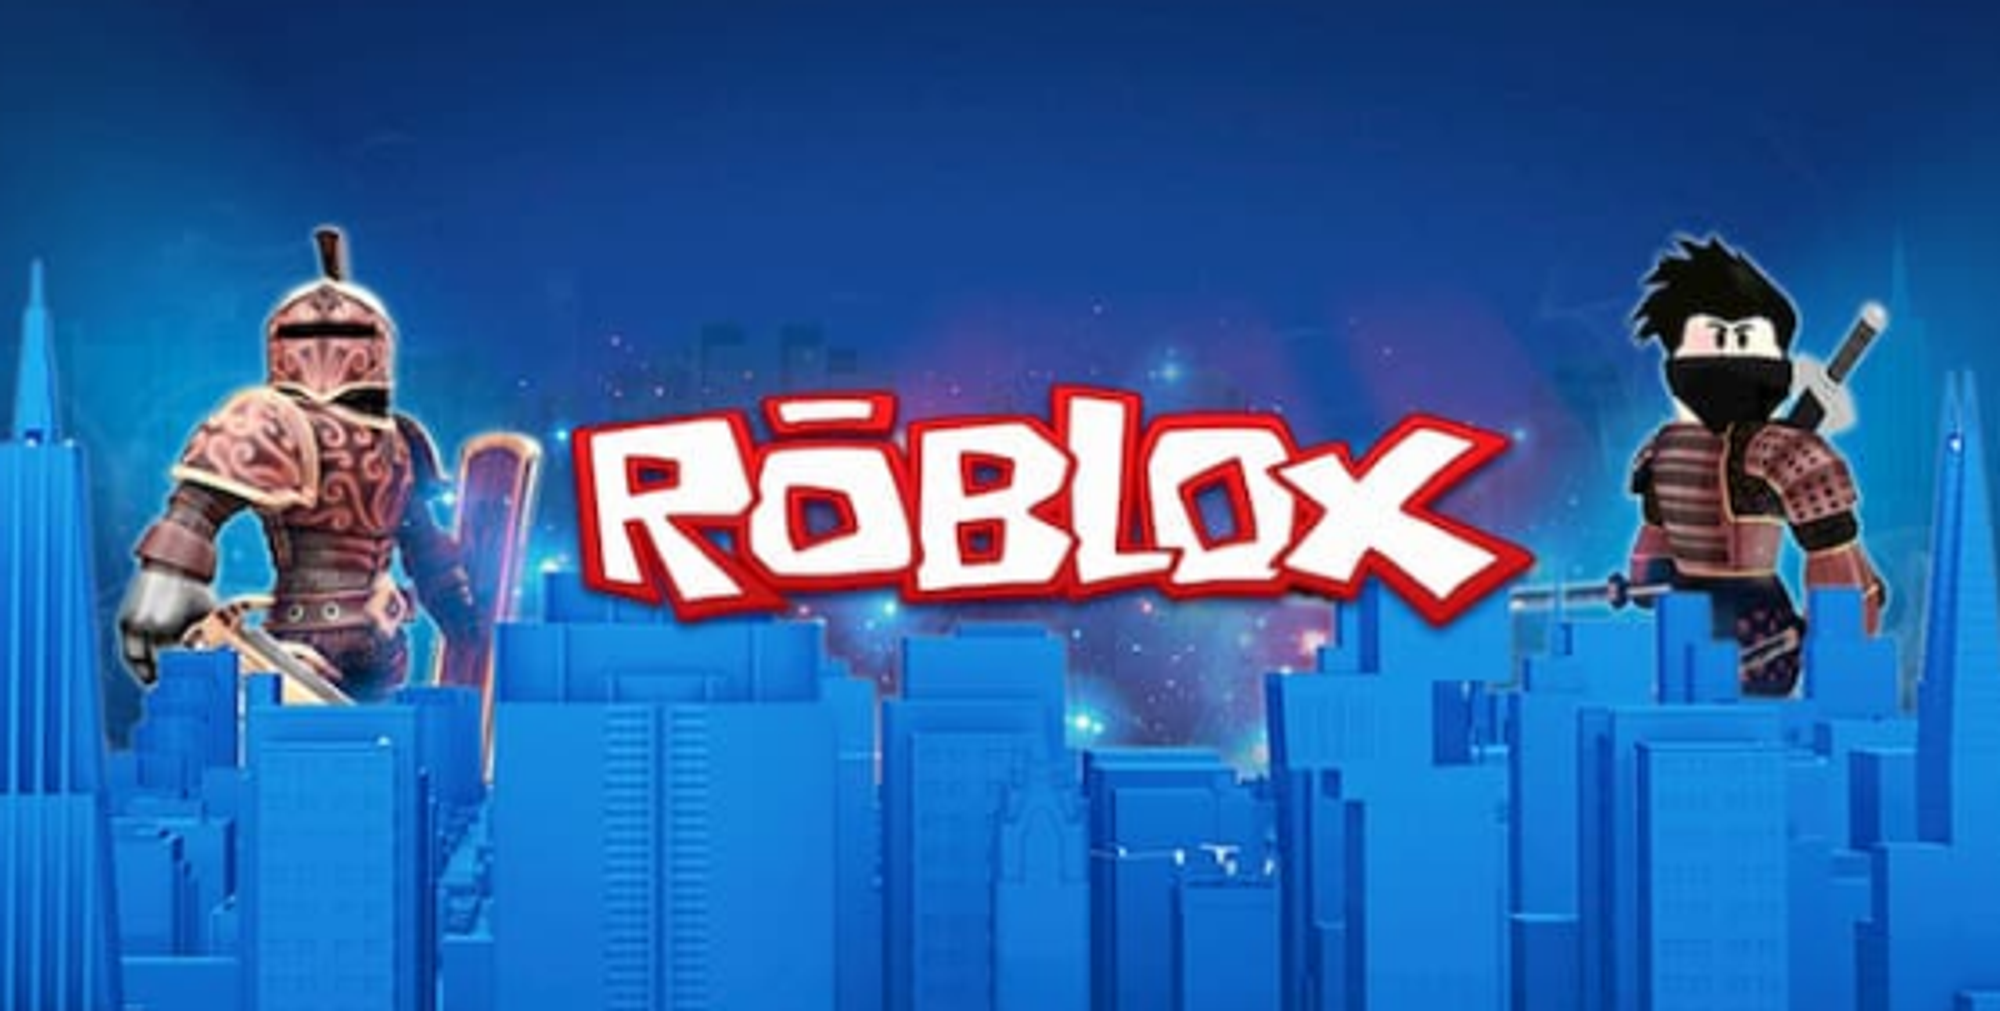 How To Hack Roblox For Robux Unlimited V12 - roblox hack v6.5 download